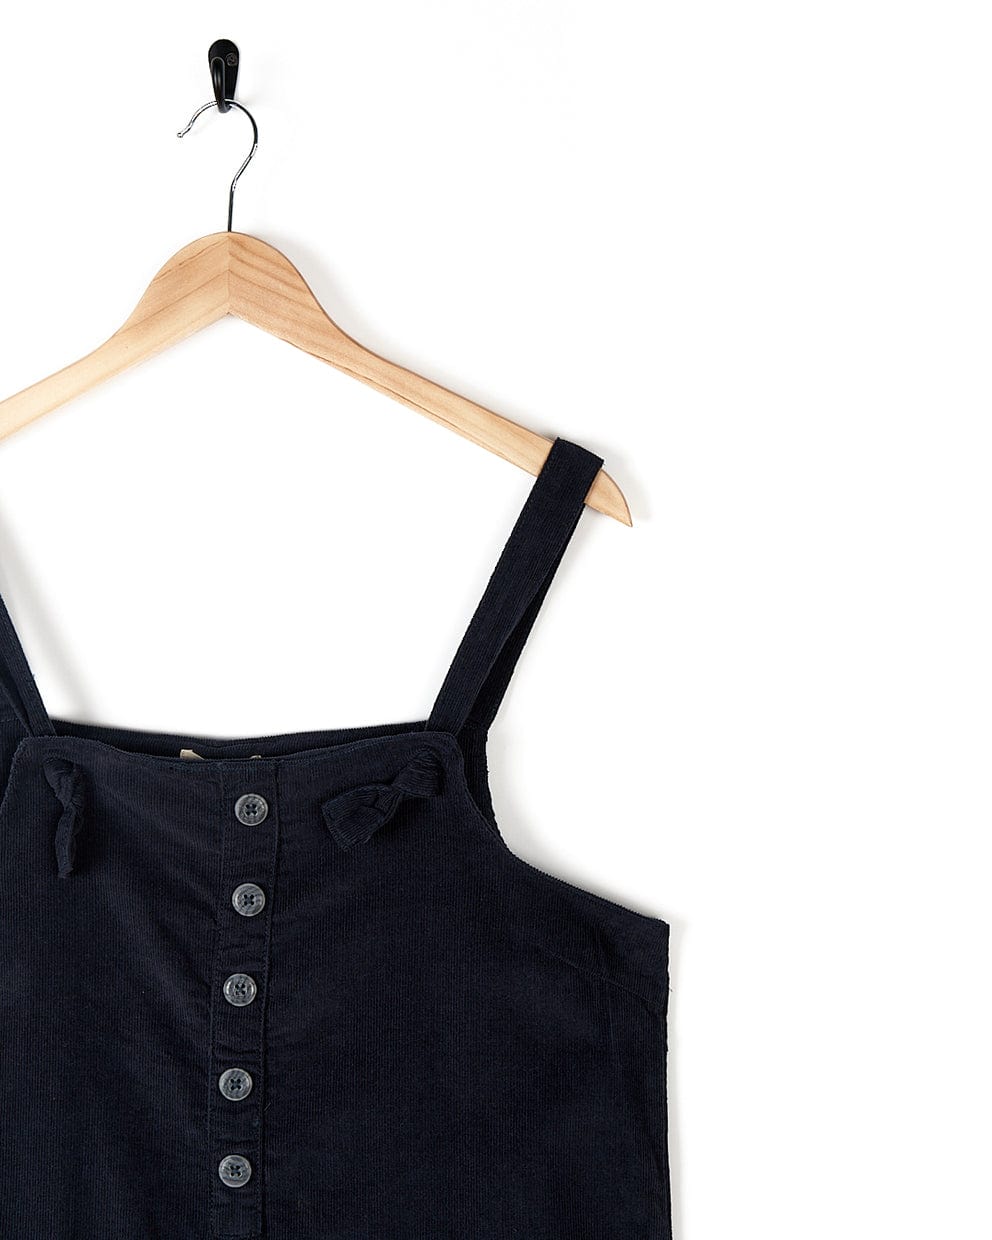 A stylish Saltrock Nancy - Womens Cord Dungaree - Dark Blue dress, made from dark blue cord material, hanging on a hanger.